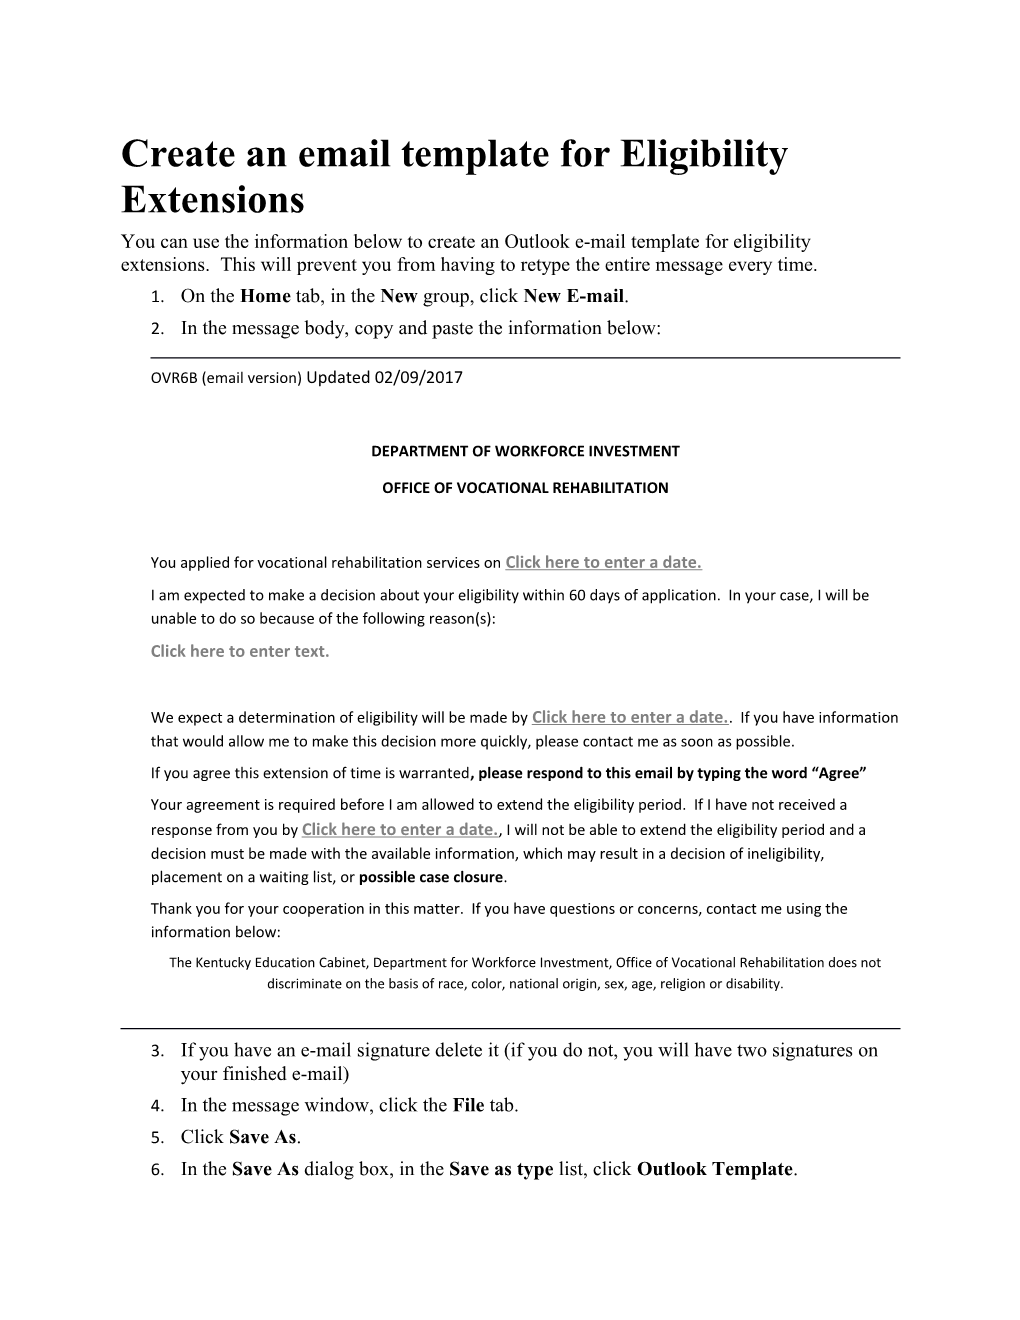 Create an Email Template for Eligibility Extensions